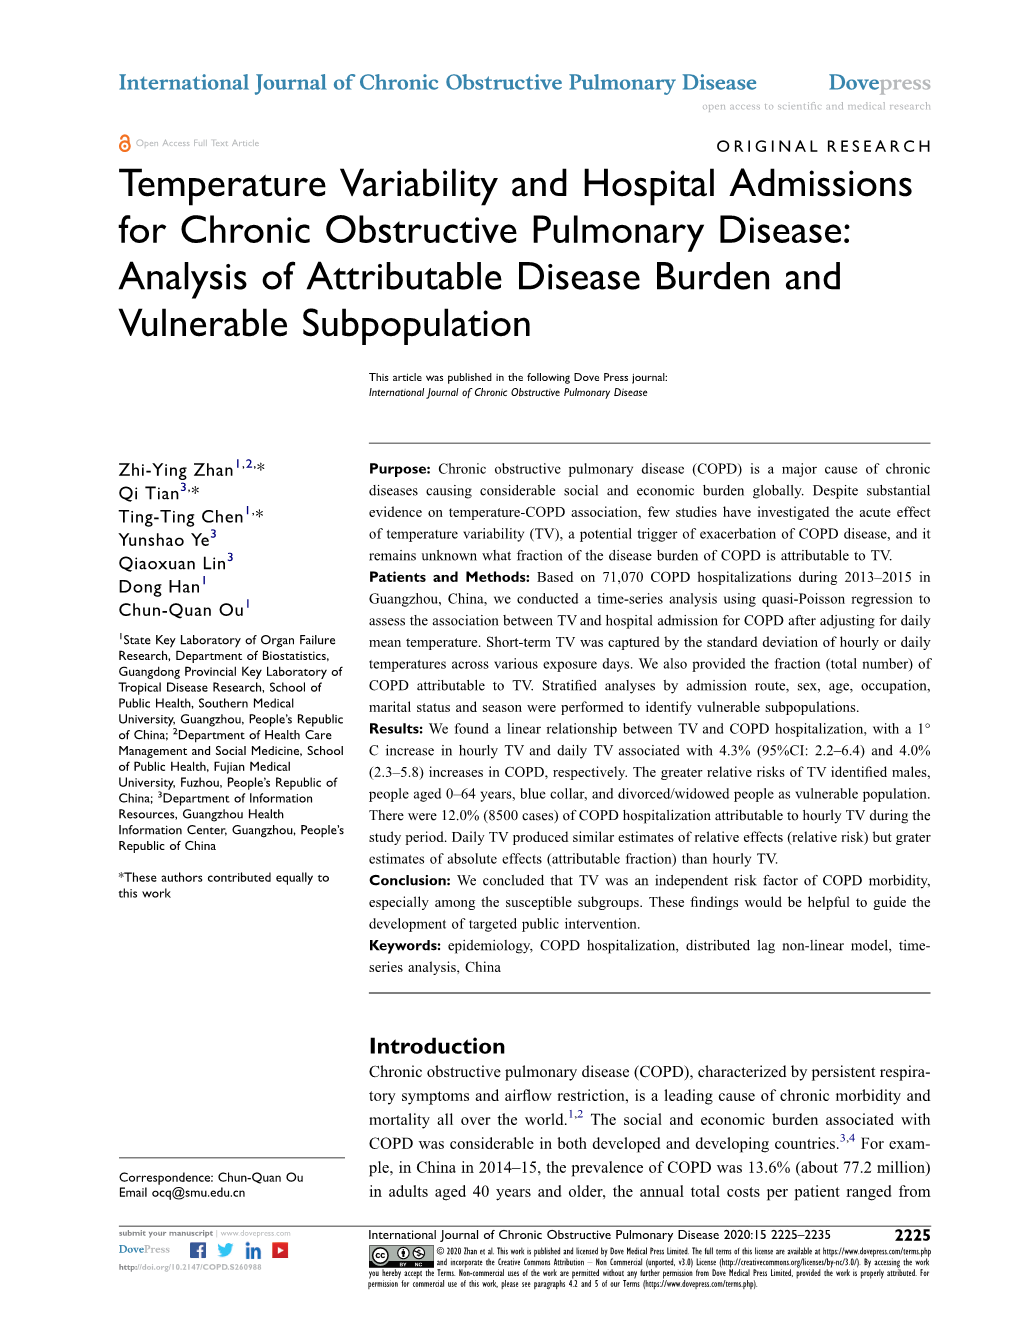 Temperature Variability and Hospital Admissions for Chronic Obstructive Pulmonary Disease: Analysis of Attributable Disease Burden and Vulnerable Subpopulation